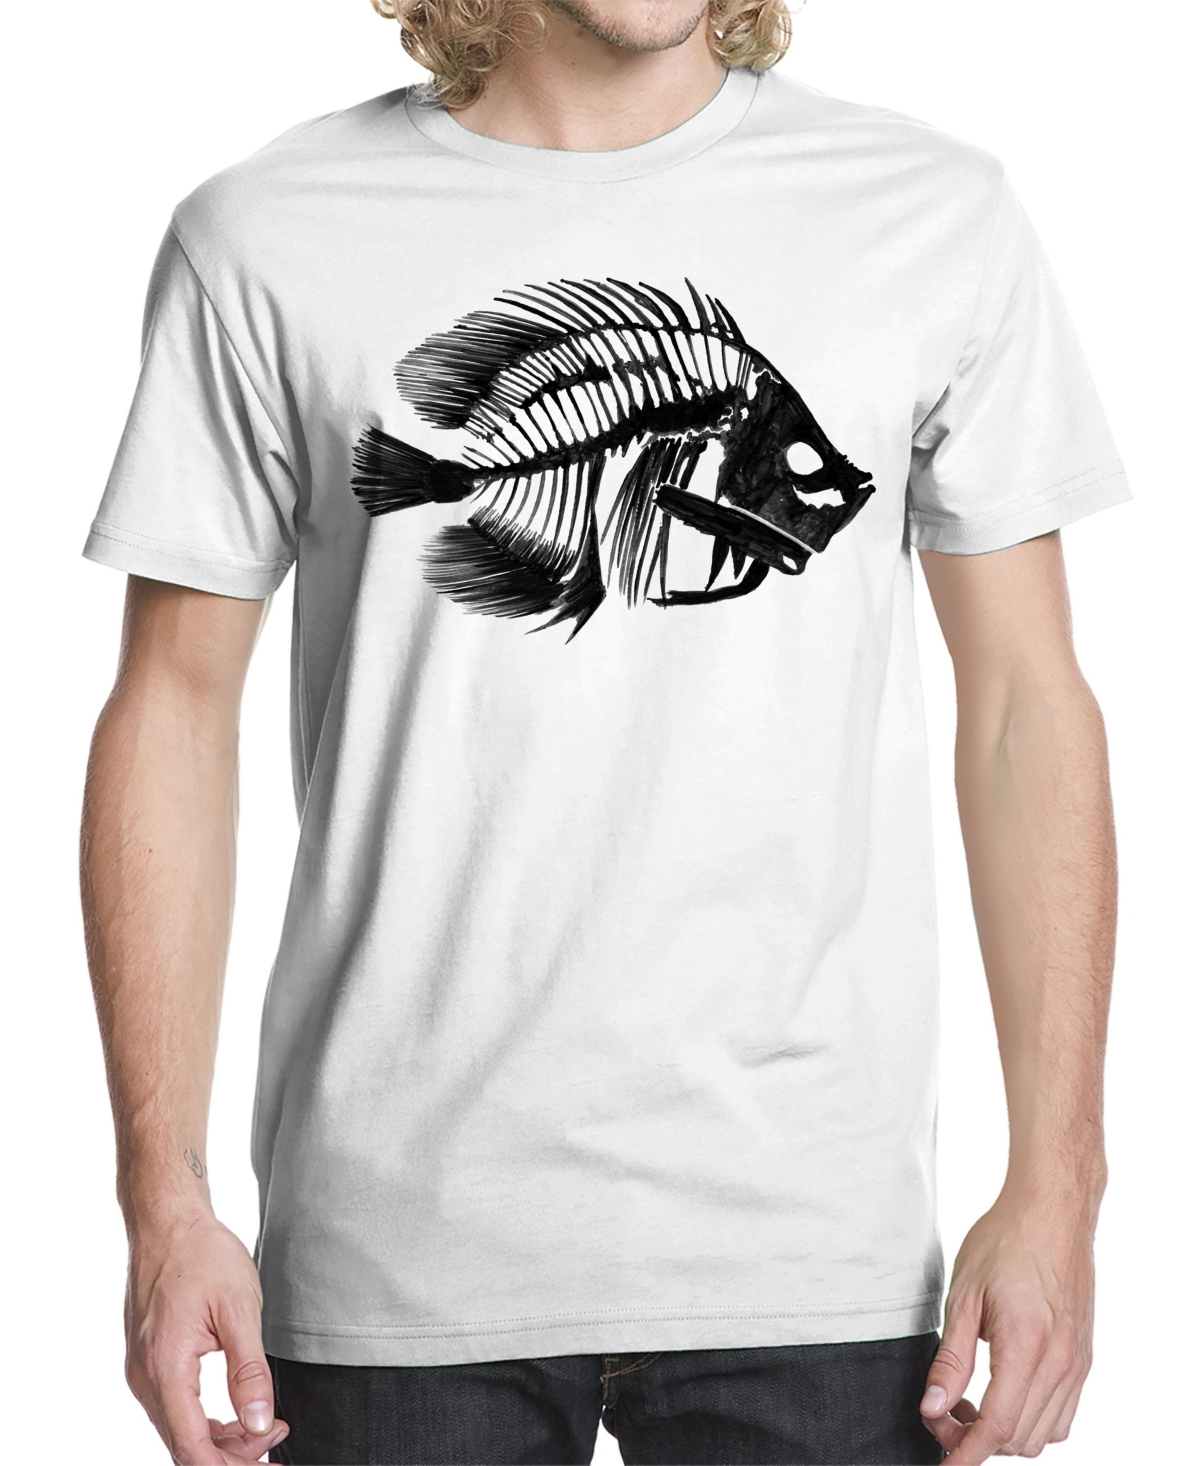 Men's Catch of the Day Graphic T-shirt - White